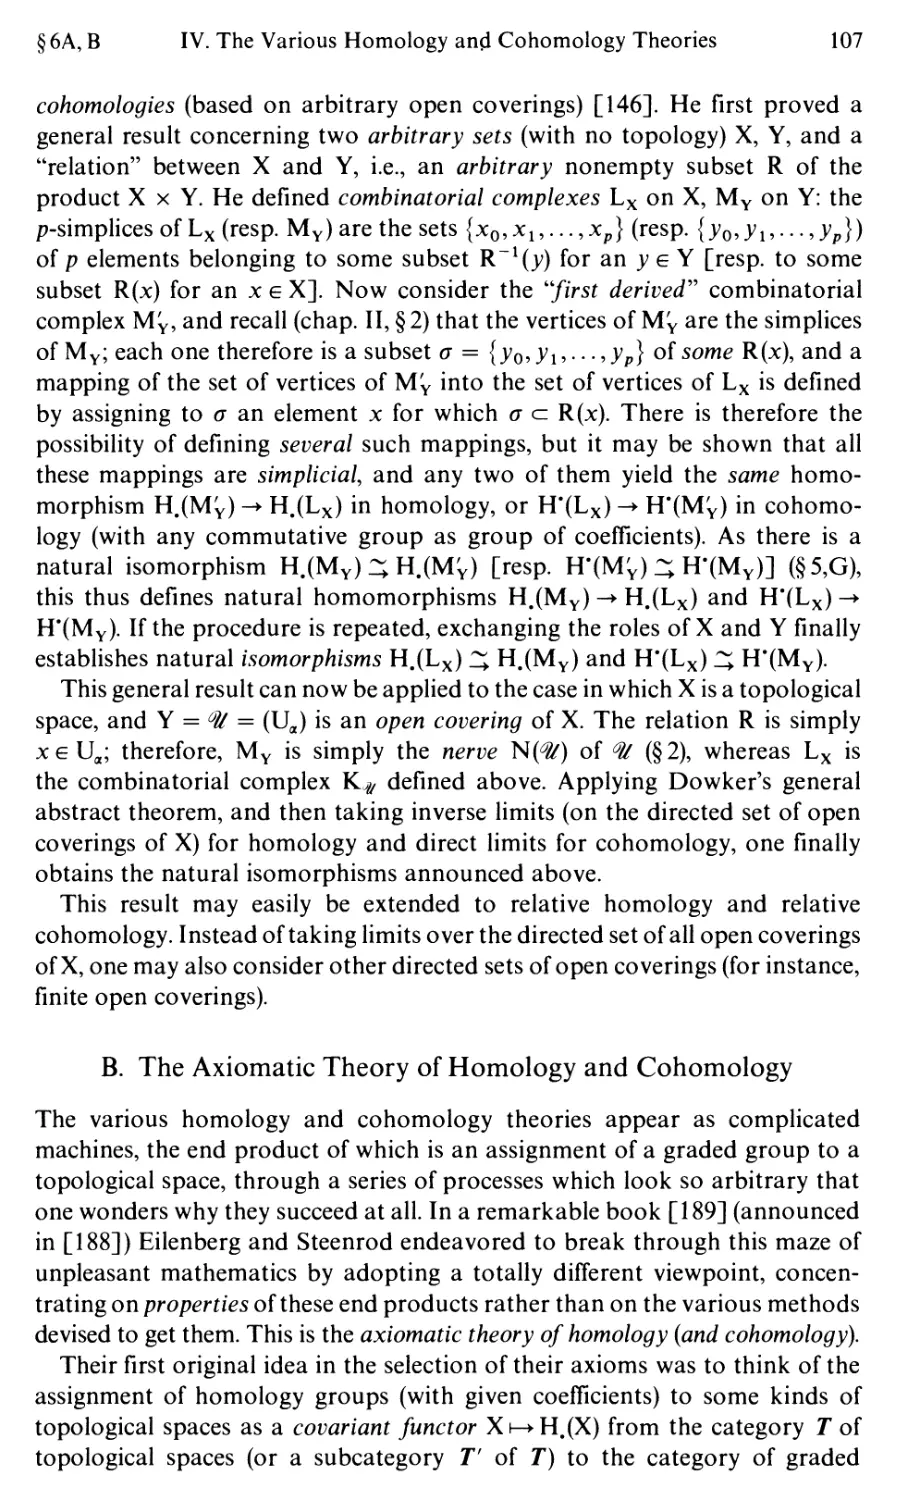 B. The Axiomatic Theory of Homology and Cohomology